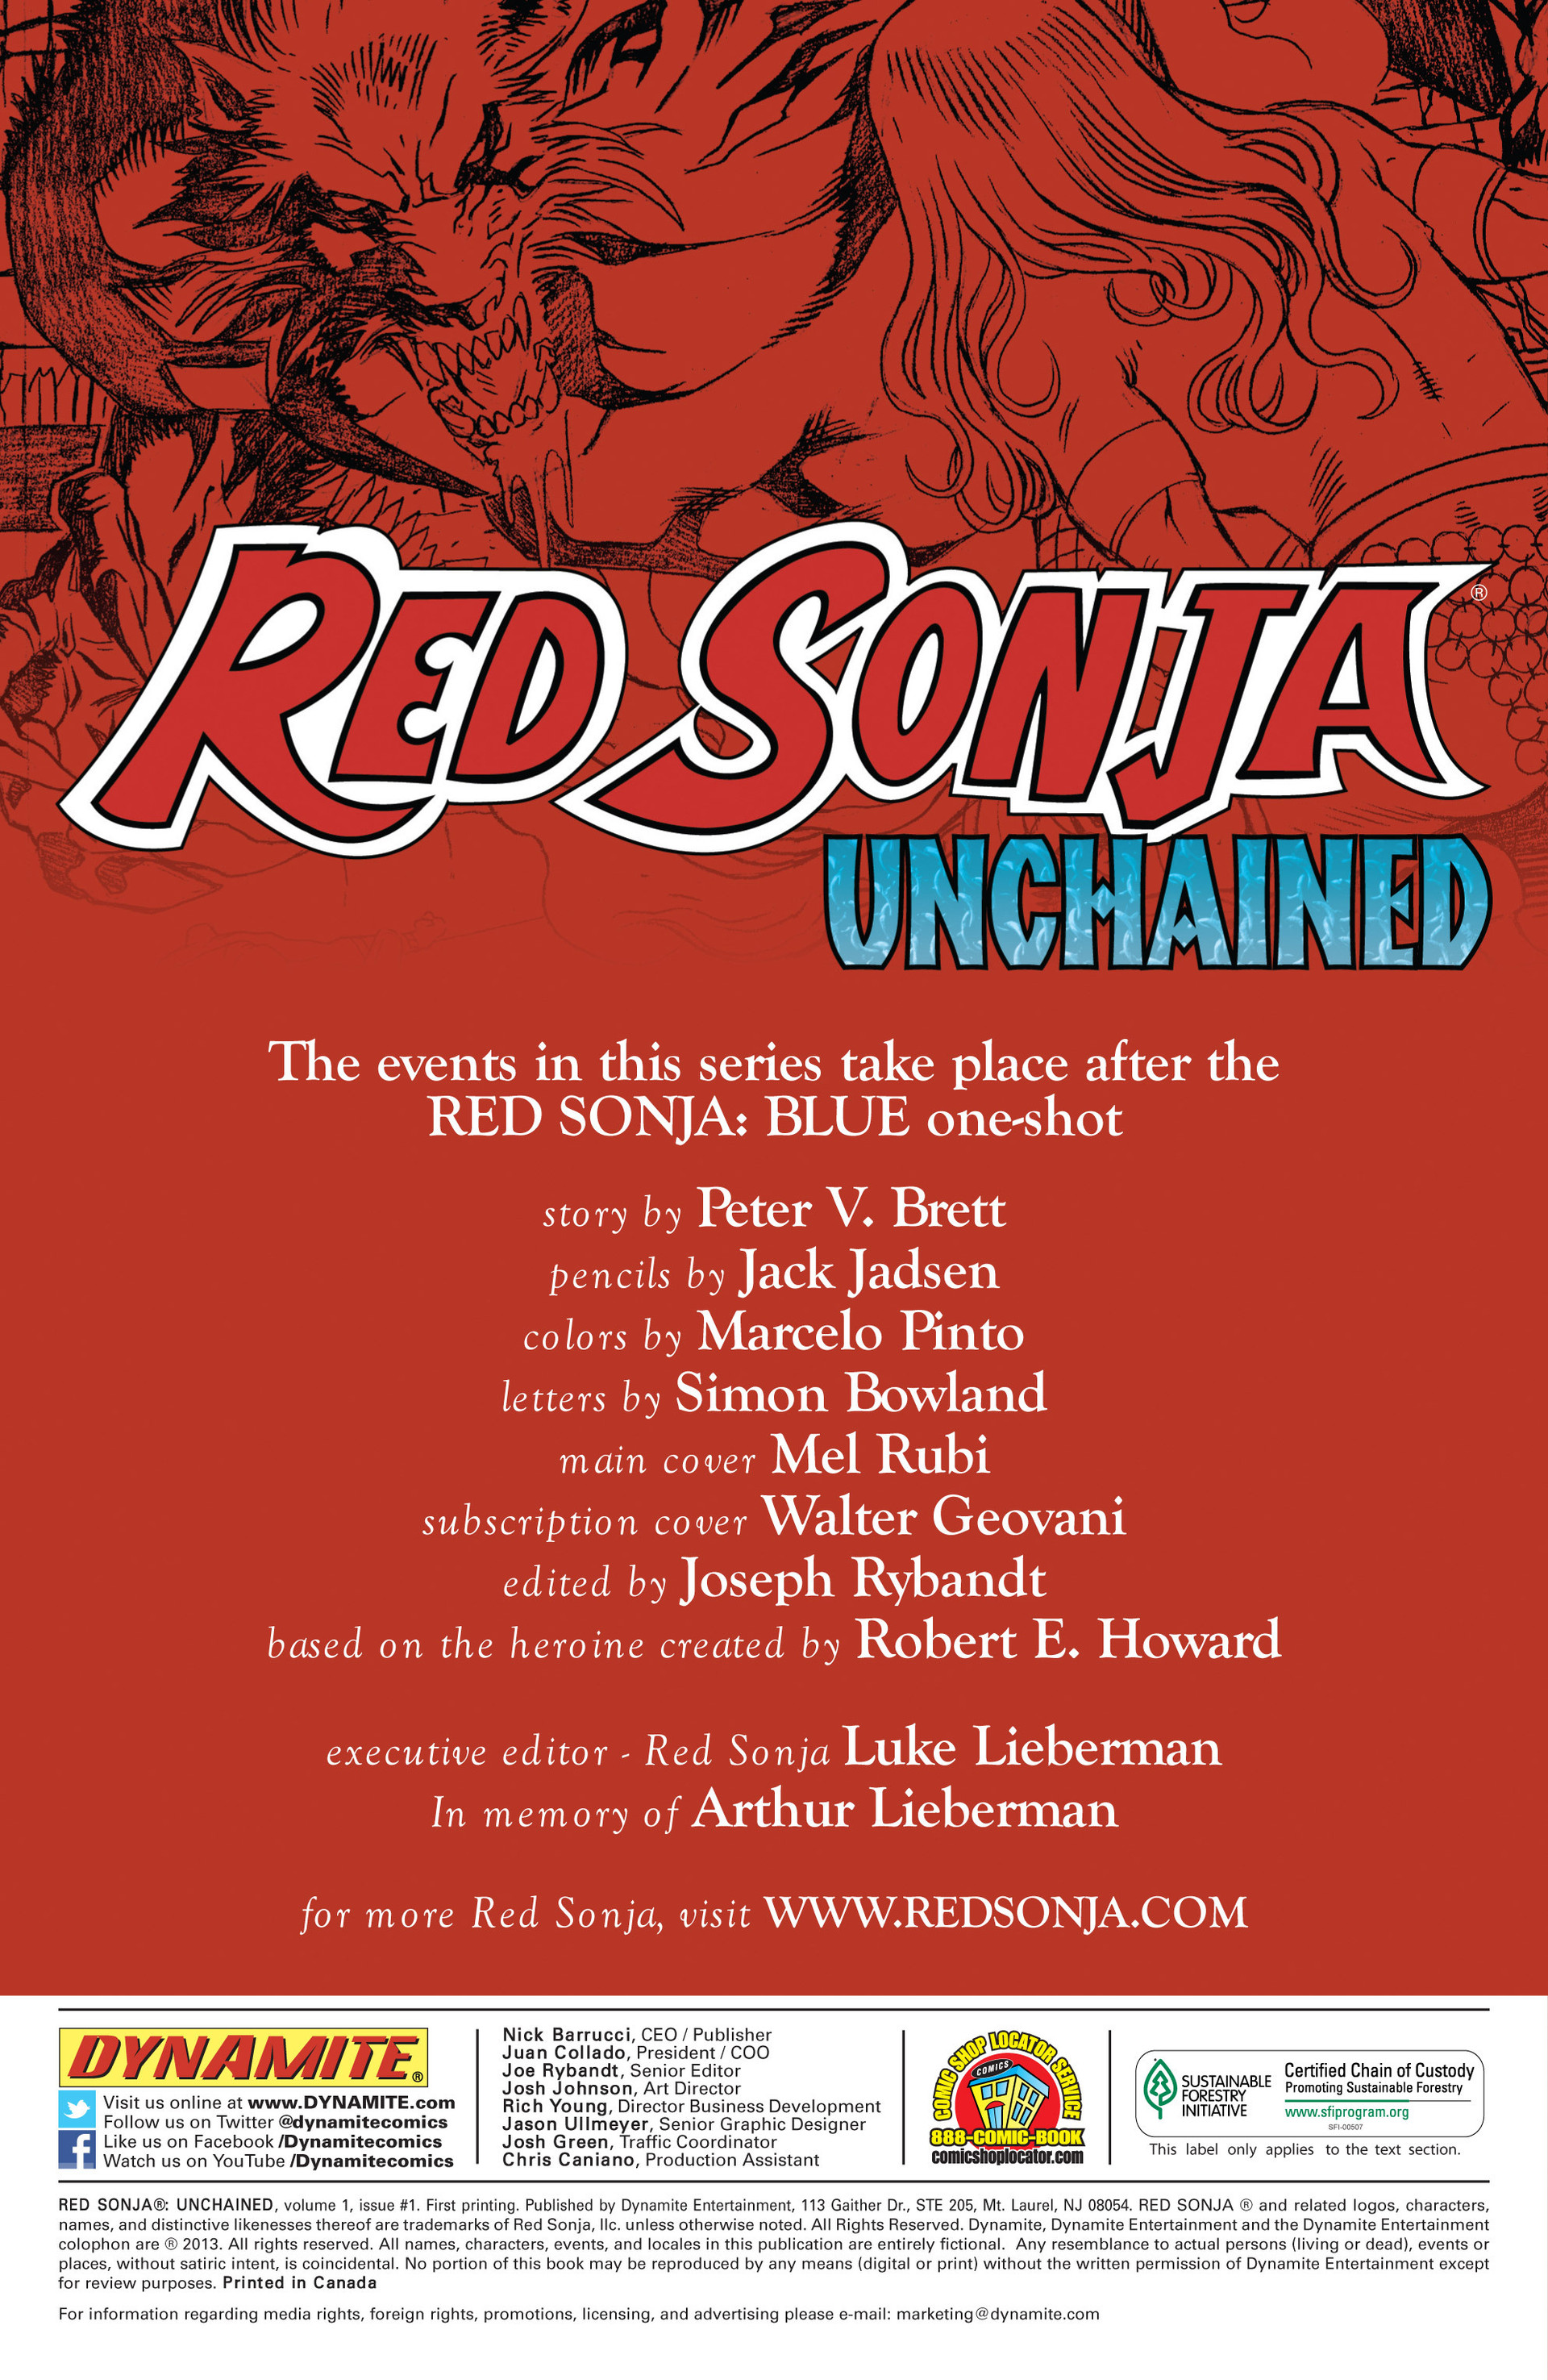 Read online Red Sonja: Unchained comic -  Issue #1 - 2